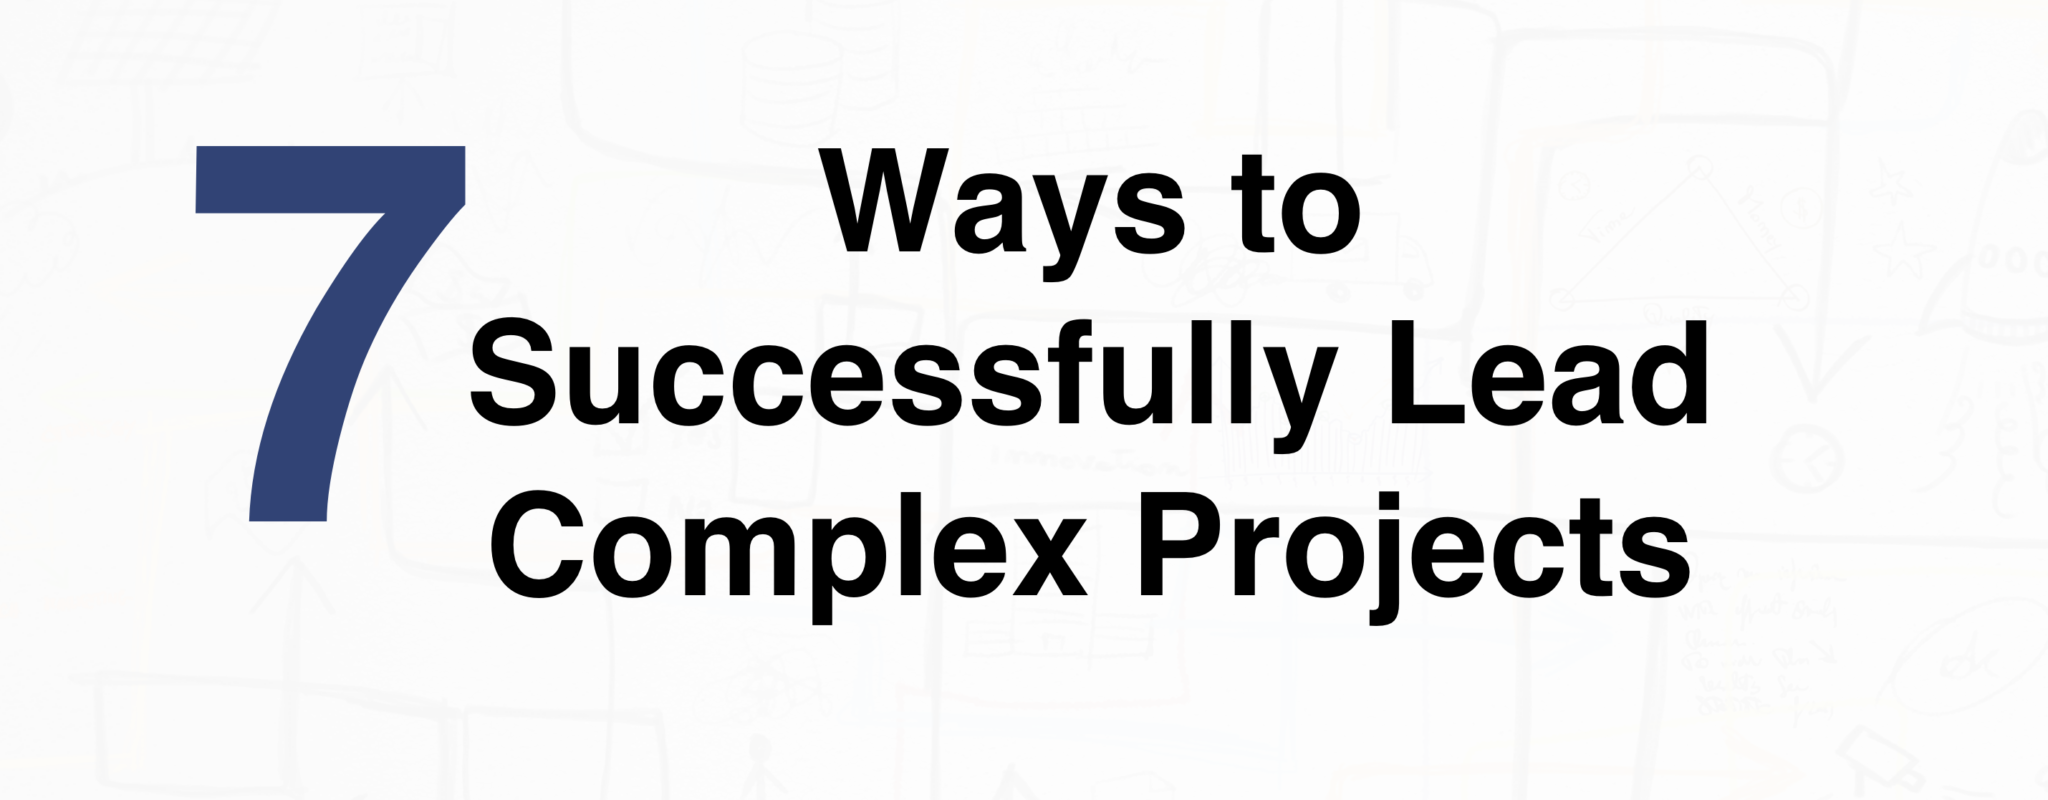 7 Ways to Successfully Lead Complex Projects